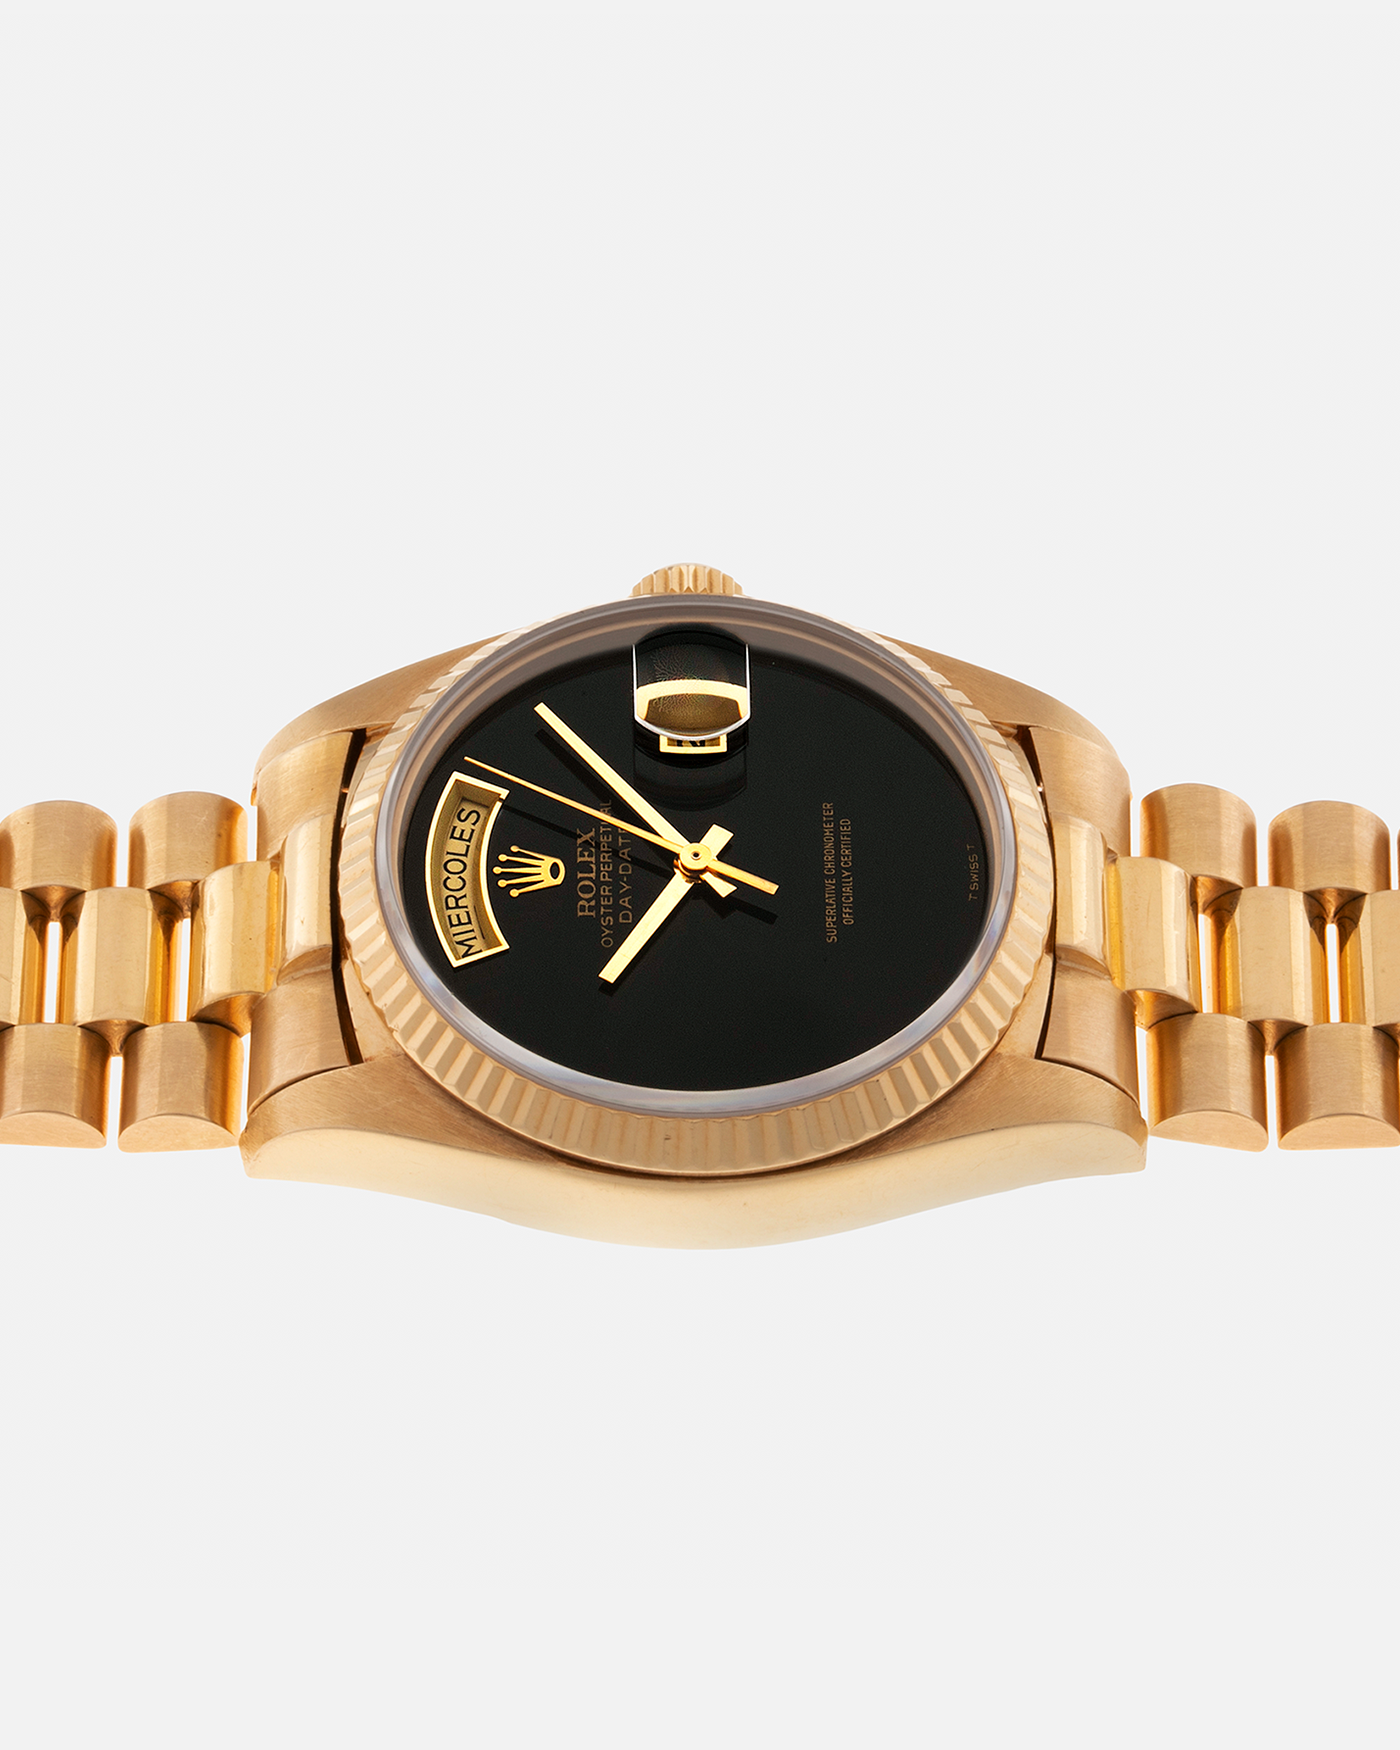 Brand: Rolex Year: 1979 Model: Day-Date, ‘Onyx’ Reference Number: 18038 Serial: 625XXXX Material: 18-carat Yellow Gold, Black Onyx Dial Movement: Rolex Cal. 3055, Self-Winding Case Diameter: 36mm Lug Width: 20mm Bracelet: Rolex ‘8385’ 18-carat Yellow Gold Presidential Bracelet with ‘55’ Curved End Links